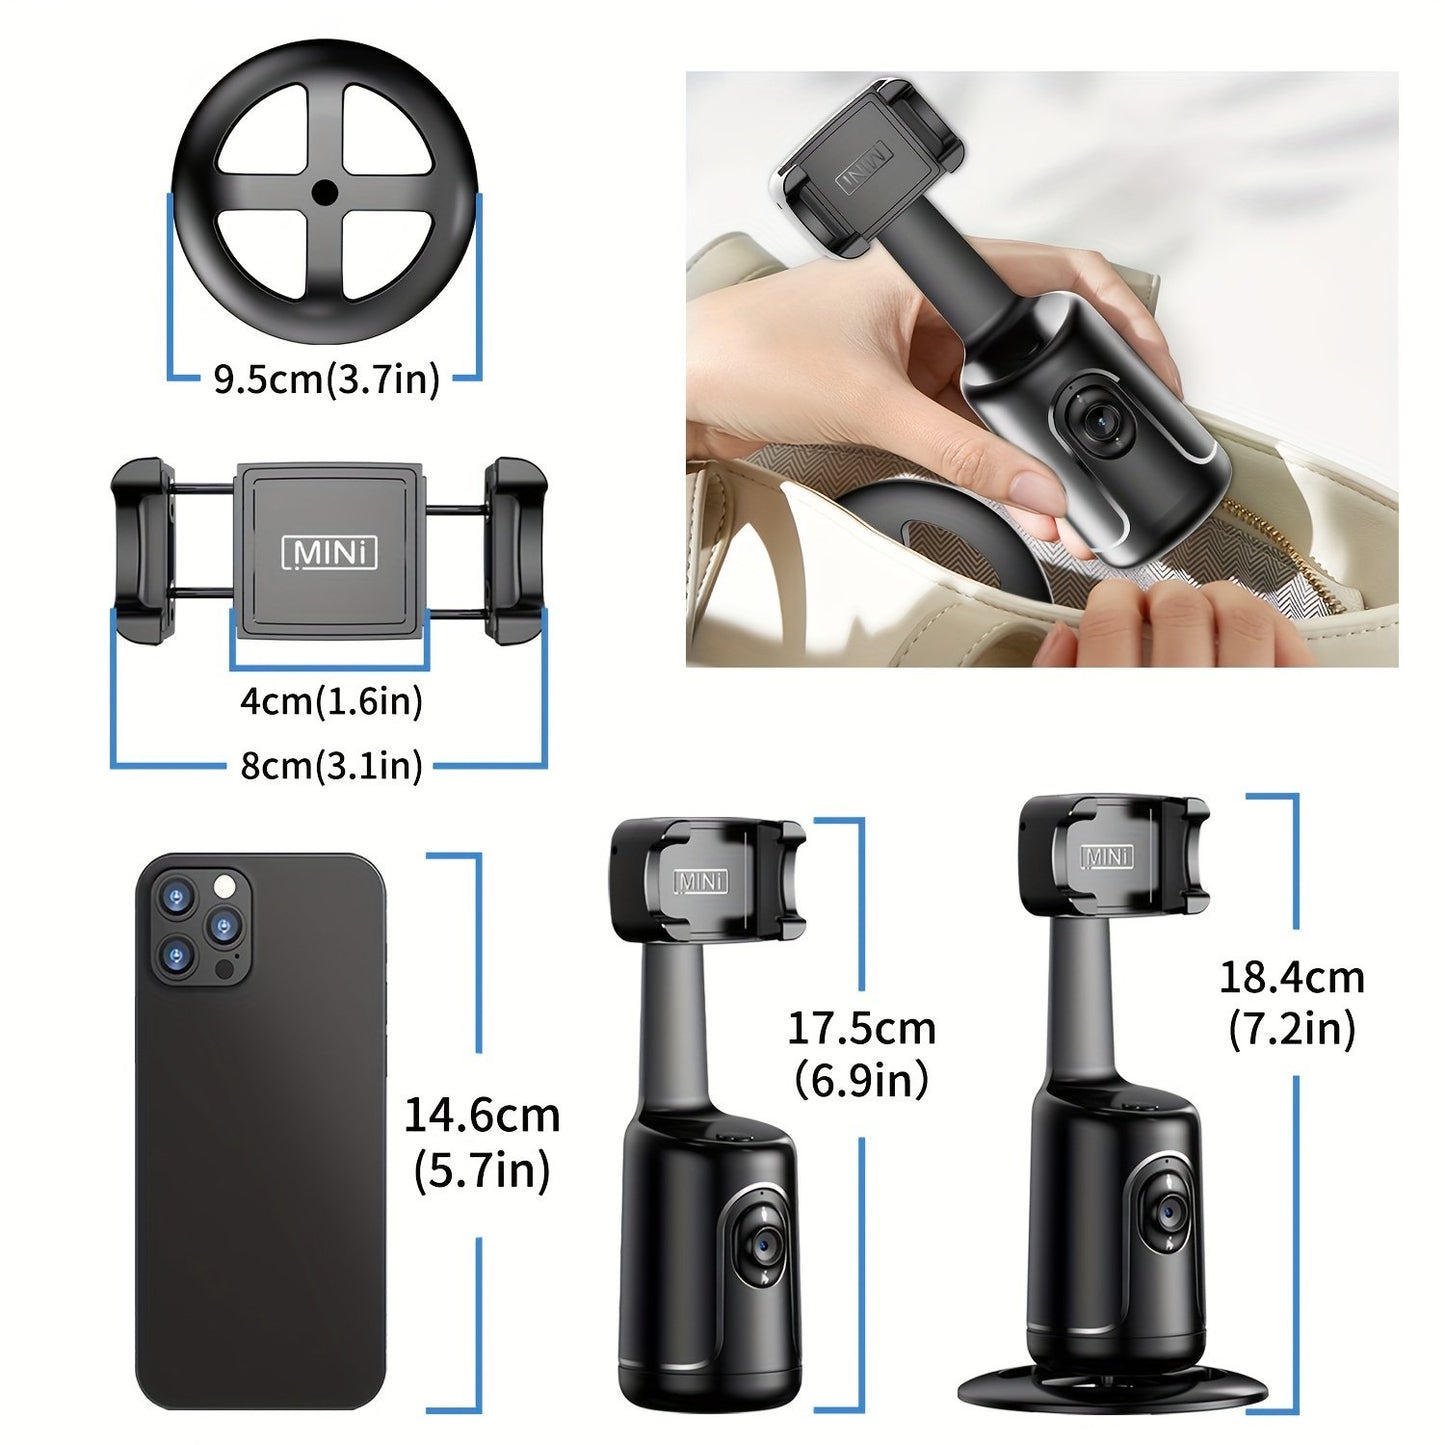 Smart Selfie Stick with Auto Tracking Phone Holder and 360 Rotation for Fast Face and Object Tracking - Perfect for Video Vlog and Live Streaming